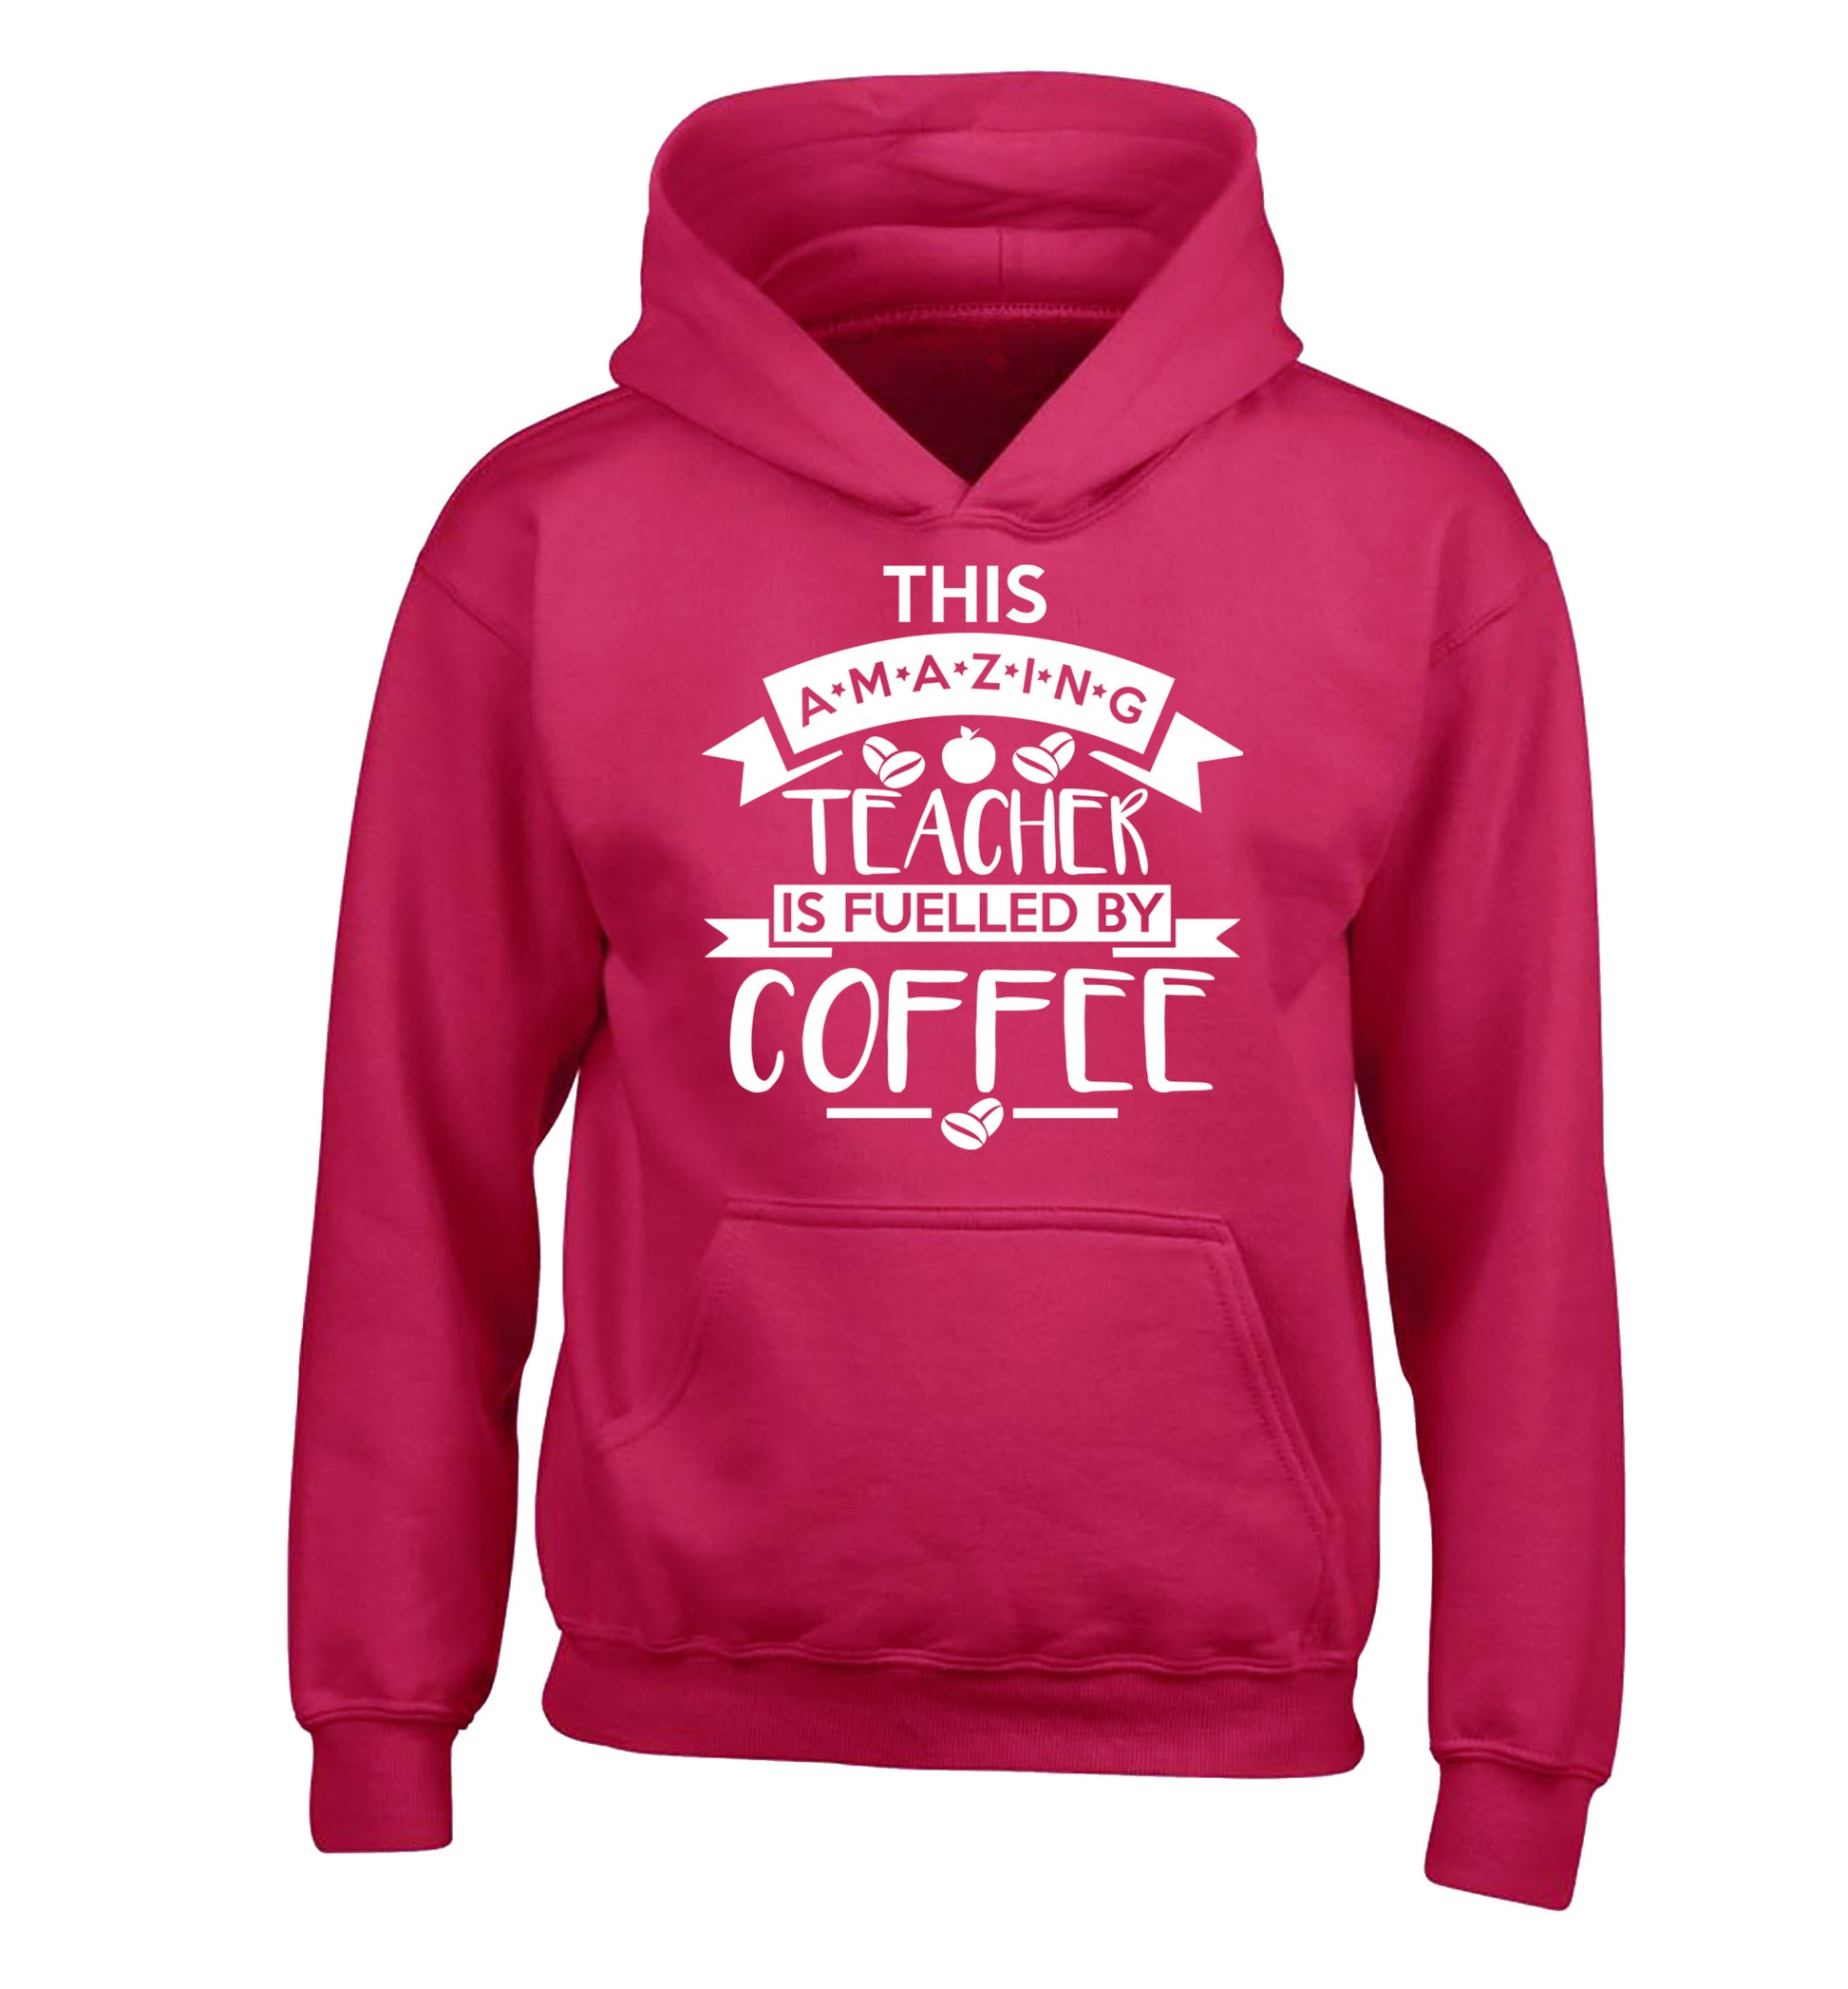 This amazing teacher is fuelled by coffee children's pink hoodie 12-13 Years